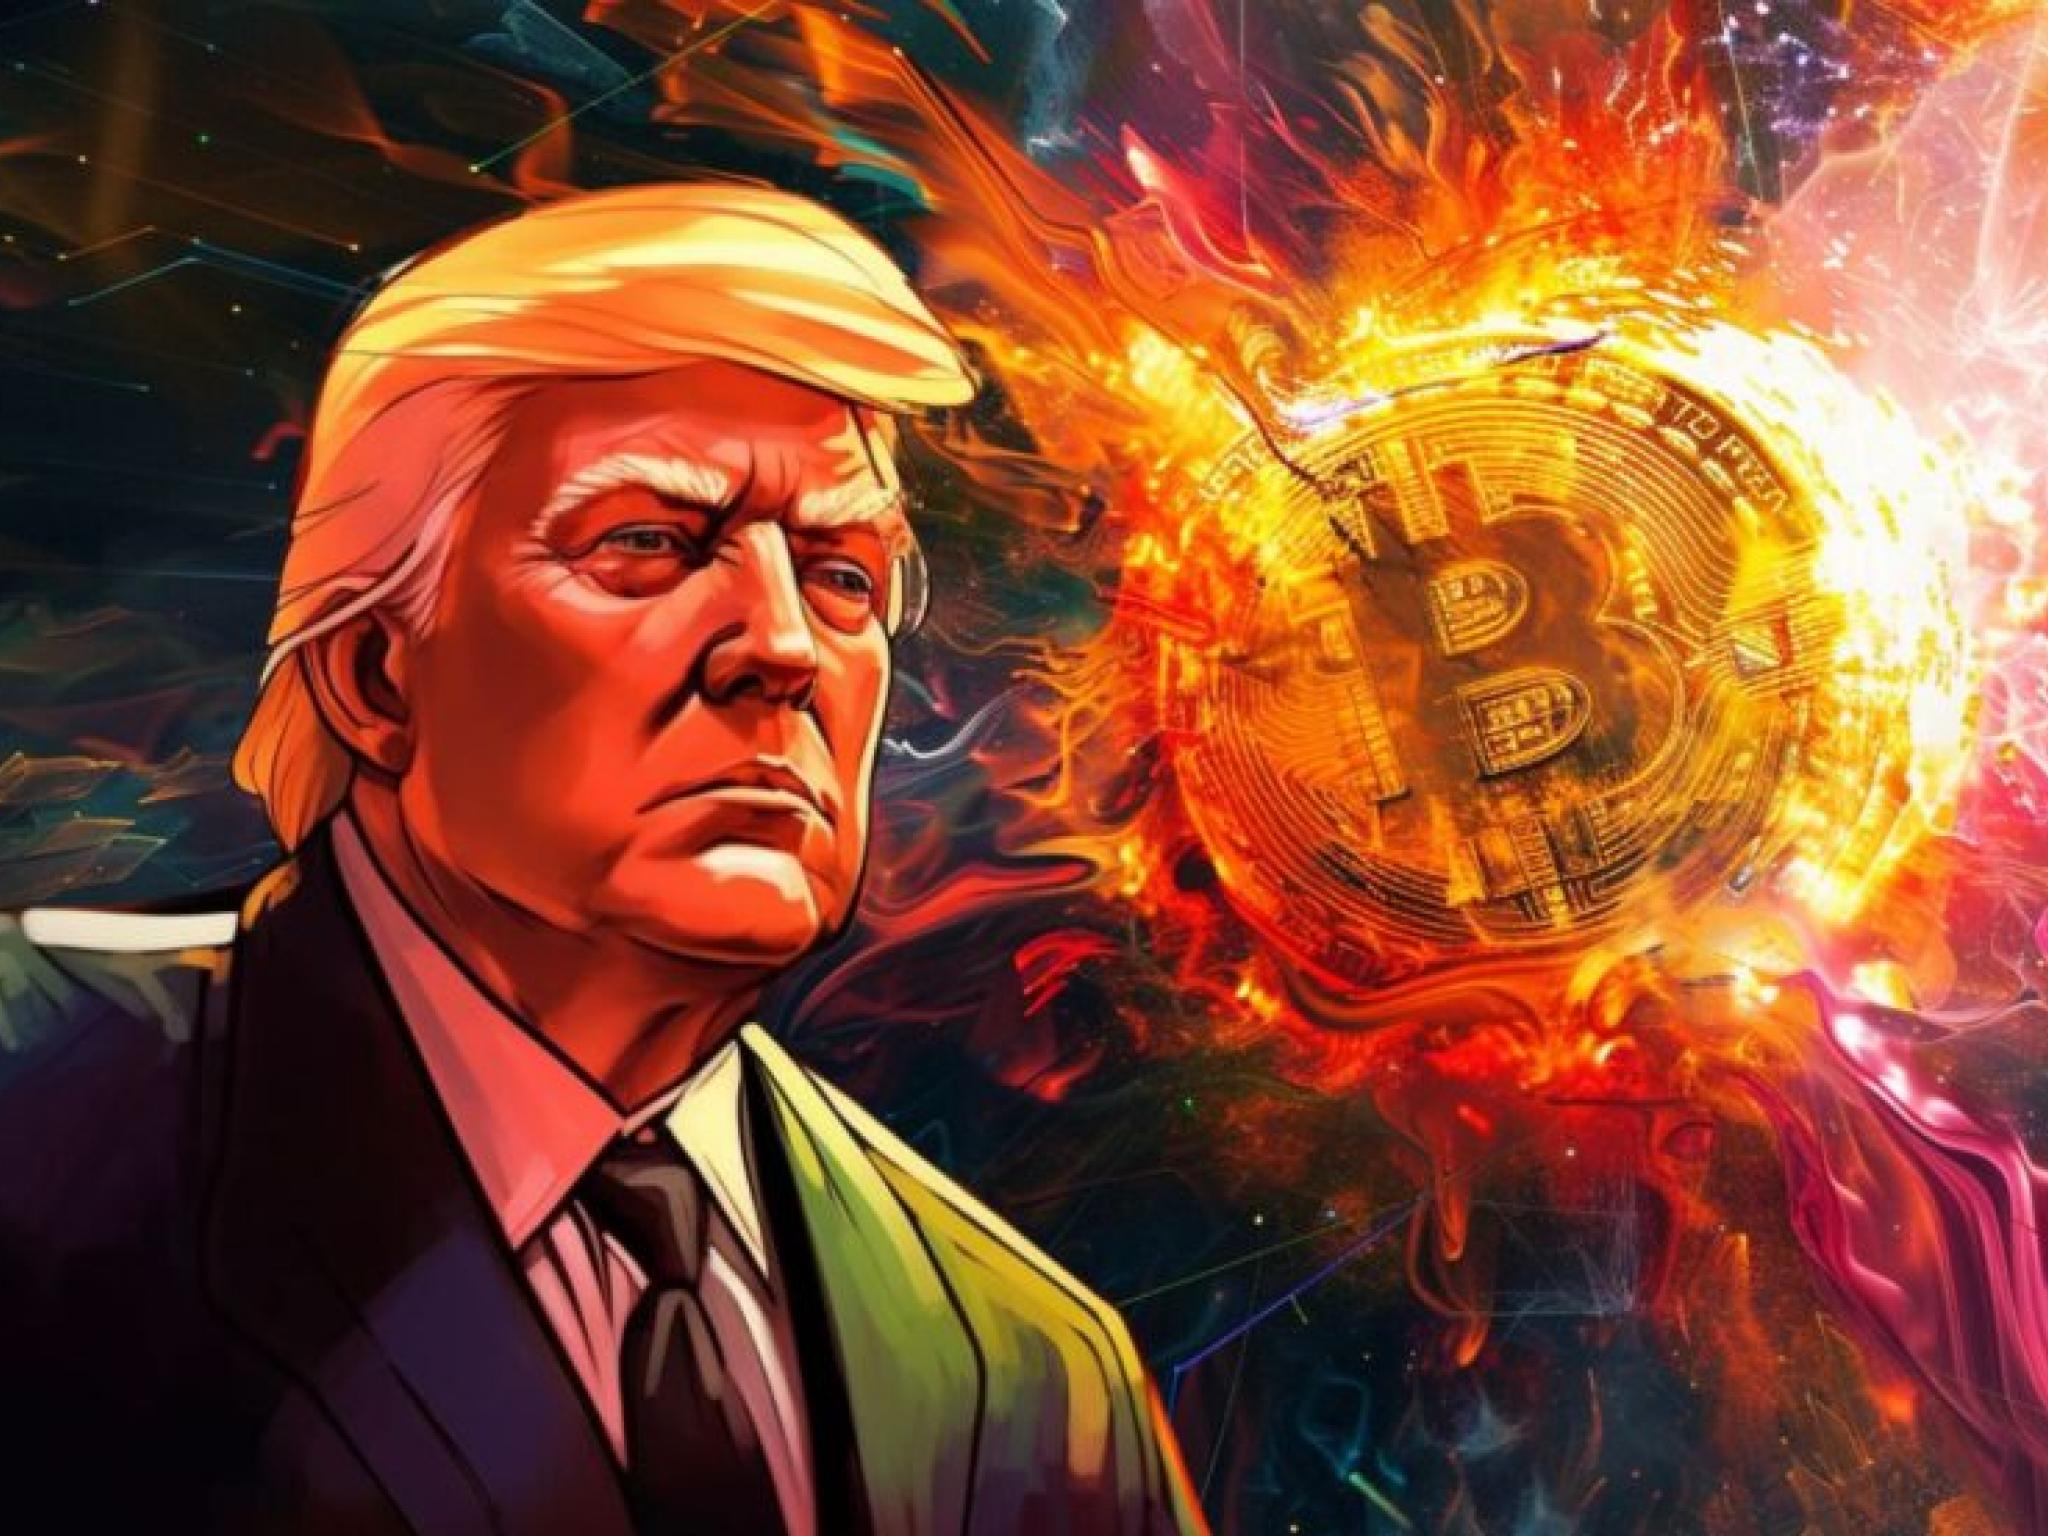  trump-nfts-are-up-over-90-since-ex-presidents-pro-crypto-comments-will-rally-continue-with-hush-money-trial-verdict 